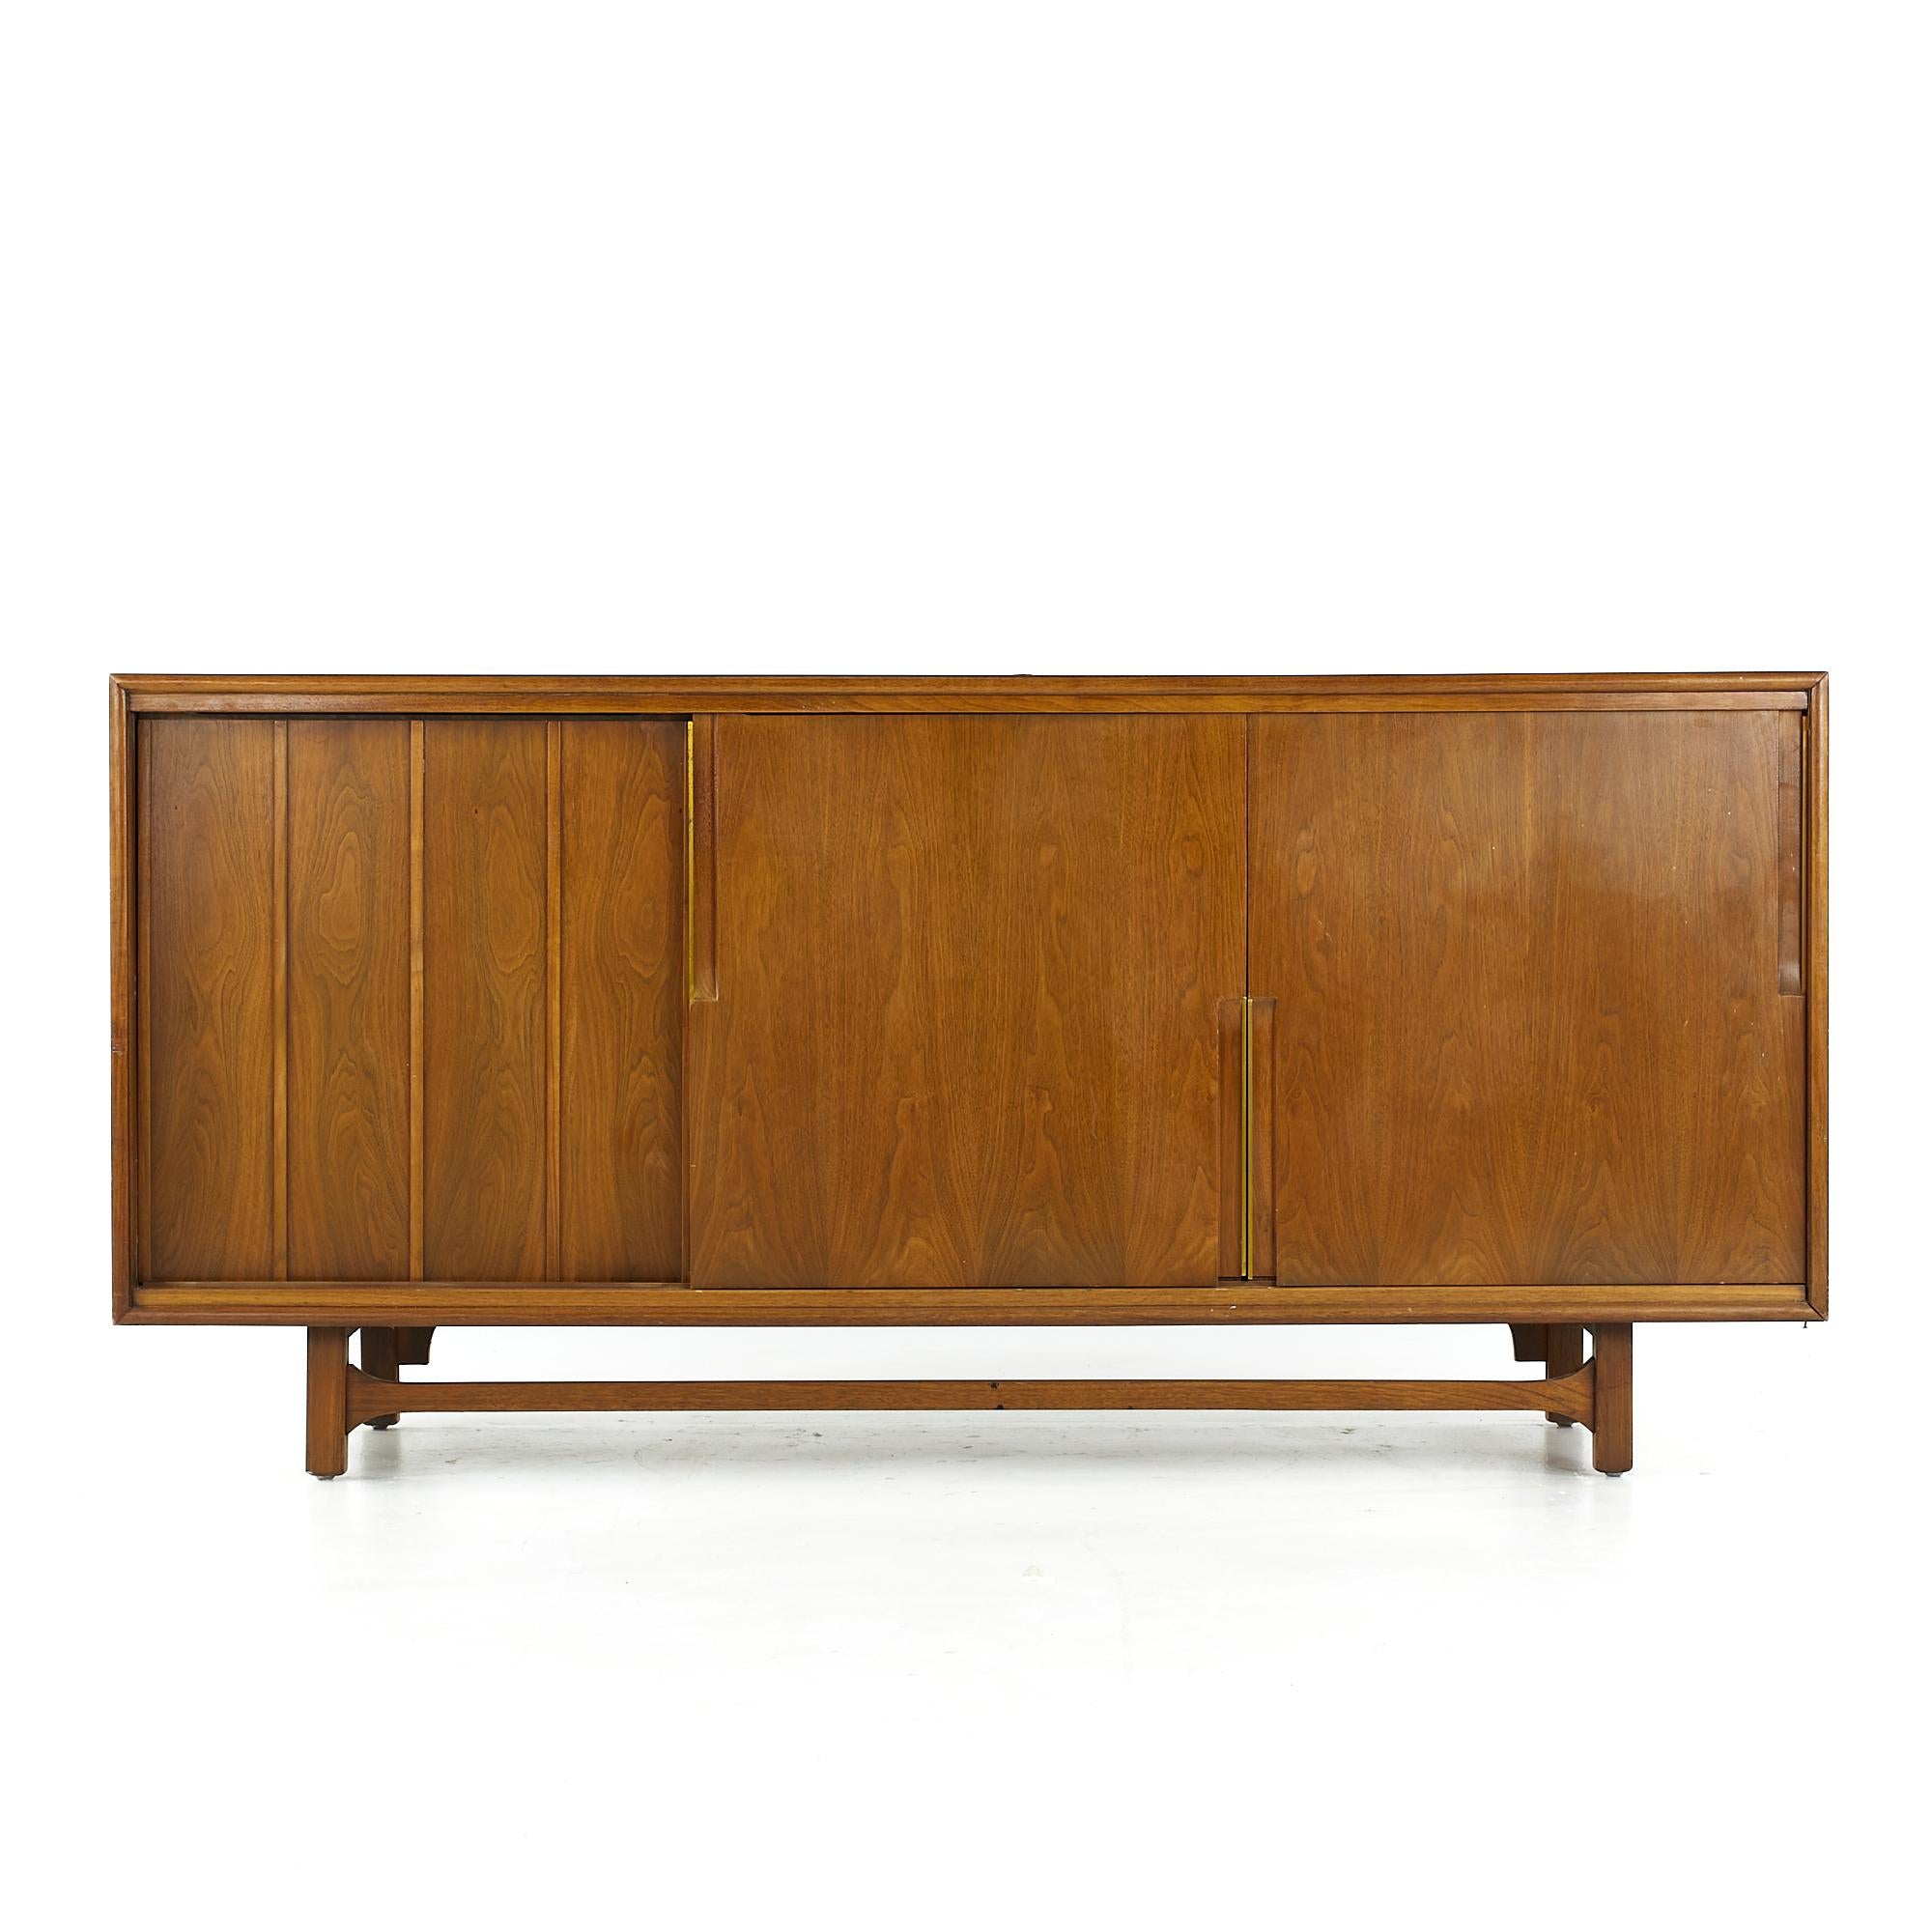 Cavalier Furniture midcentury brass and walnut lowboy dresser.

This lowboy measures: 72 wide x 21 deep x 34.5 inches high

All pieces of furniture can be had in what we call restored vintage condition. That means the piece is restored upon